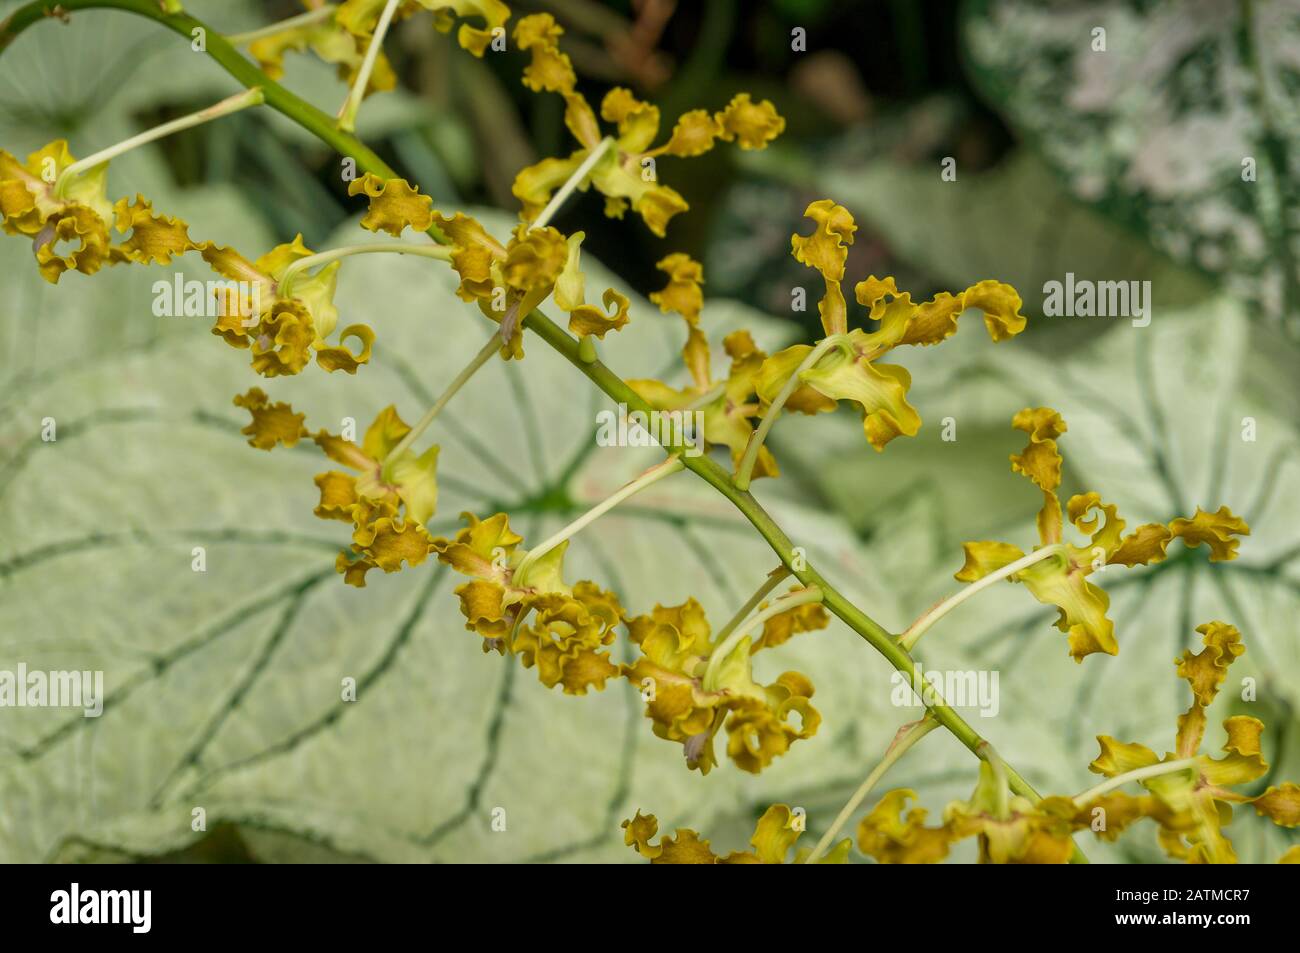 Oncostele orchid branch with small flowers with curly petals Stock Photo